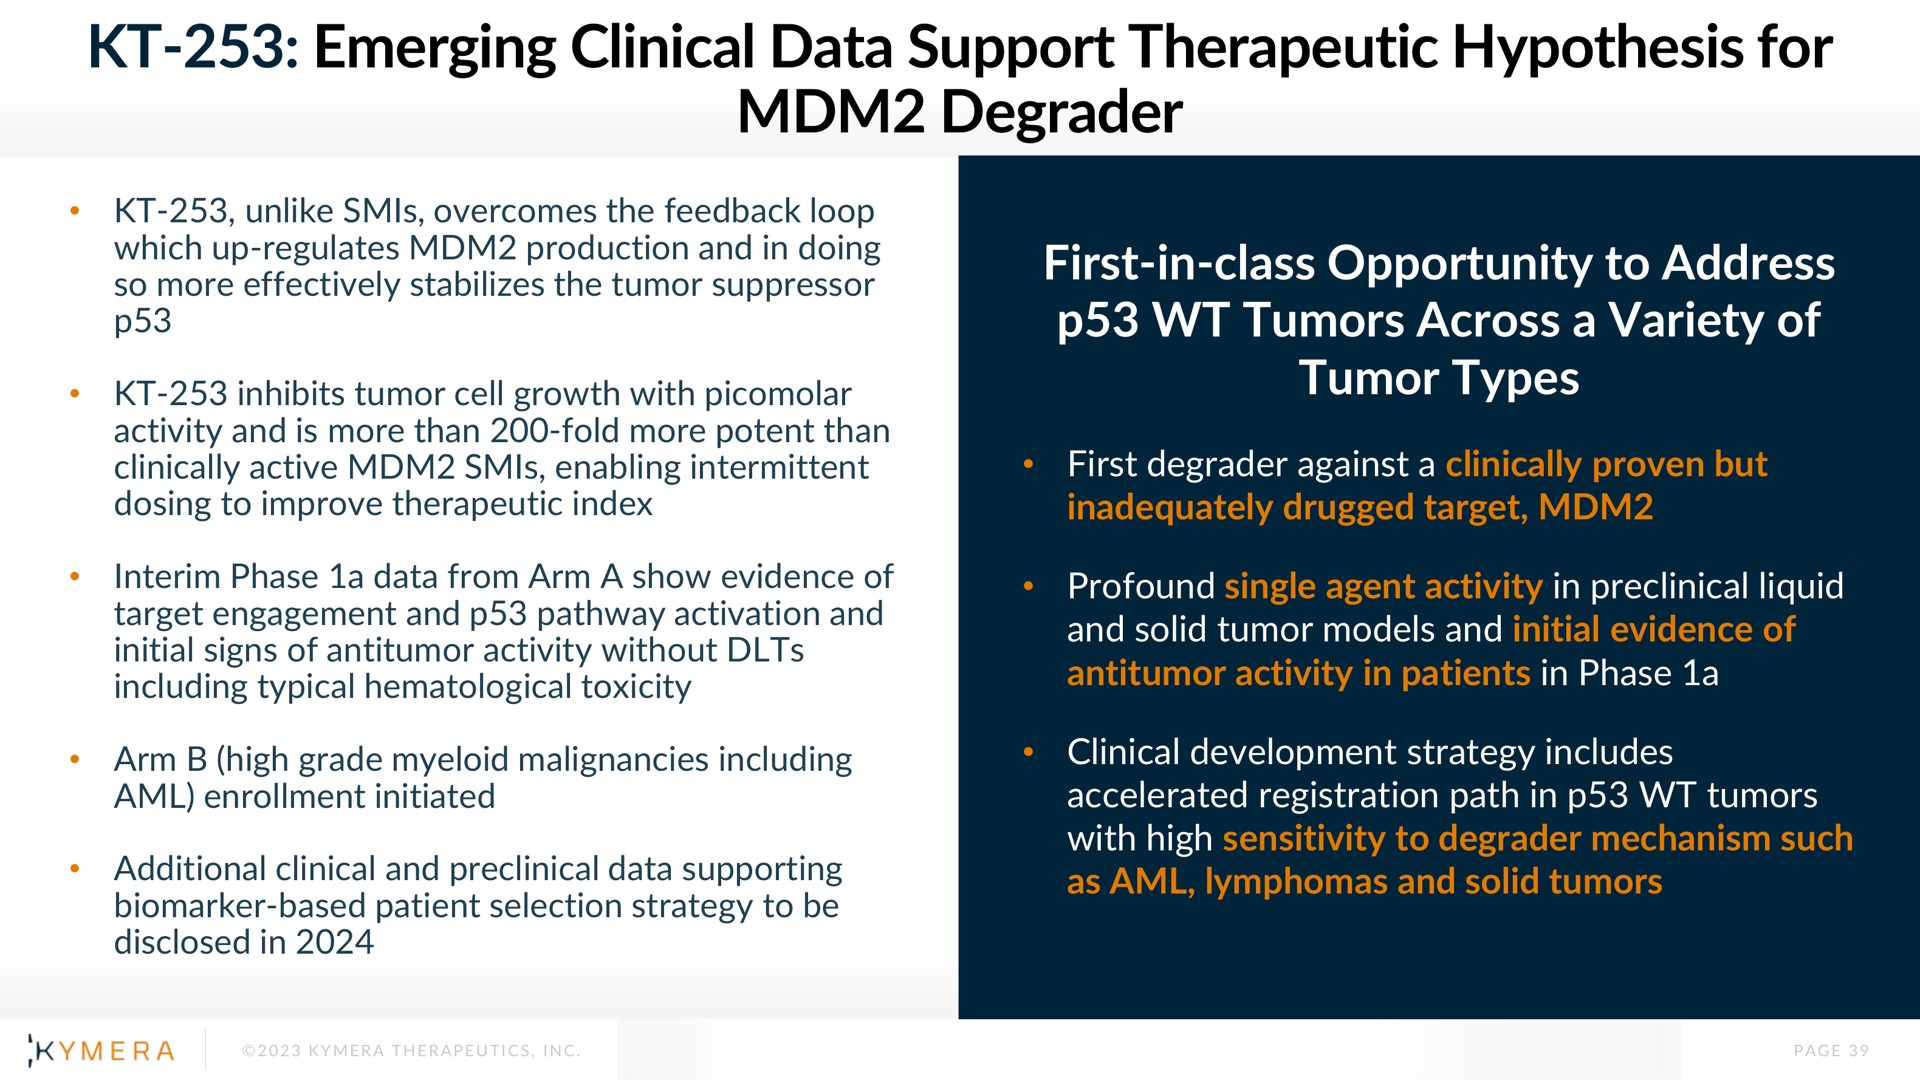 emerging clinical data support therapeutic hypothesis for degrader | Kymera